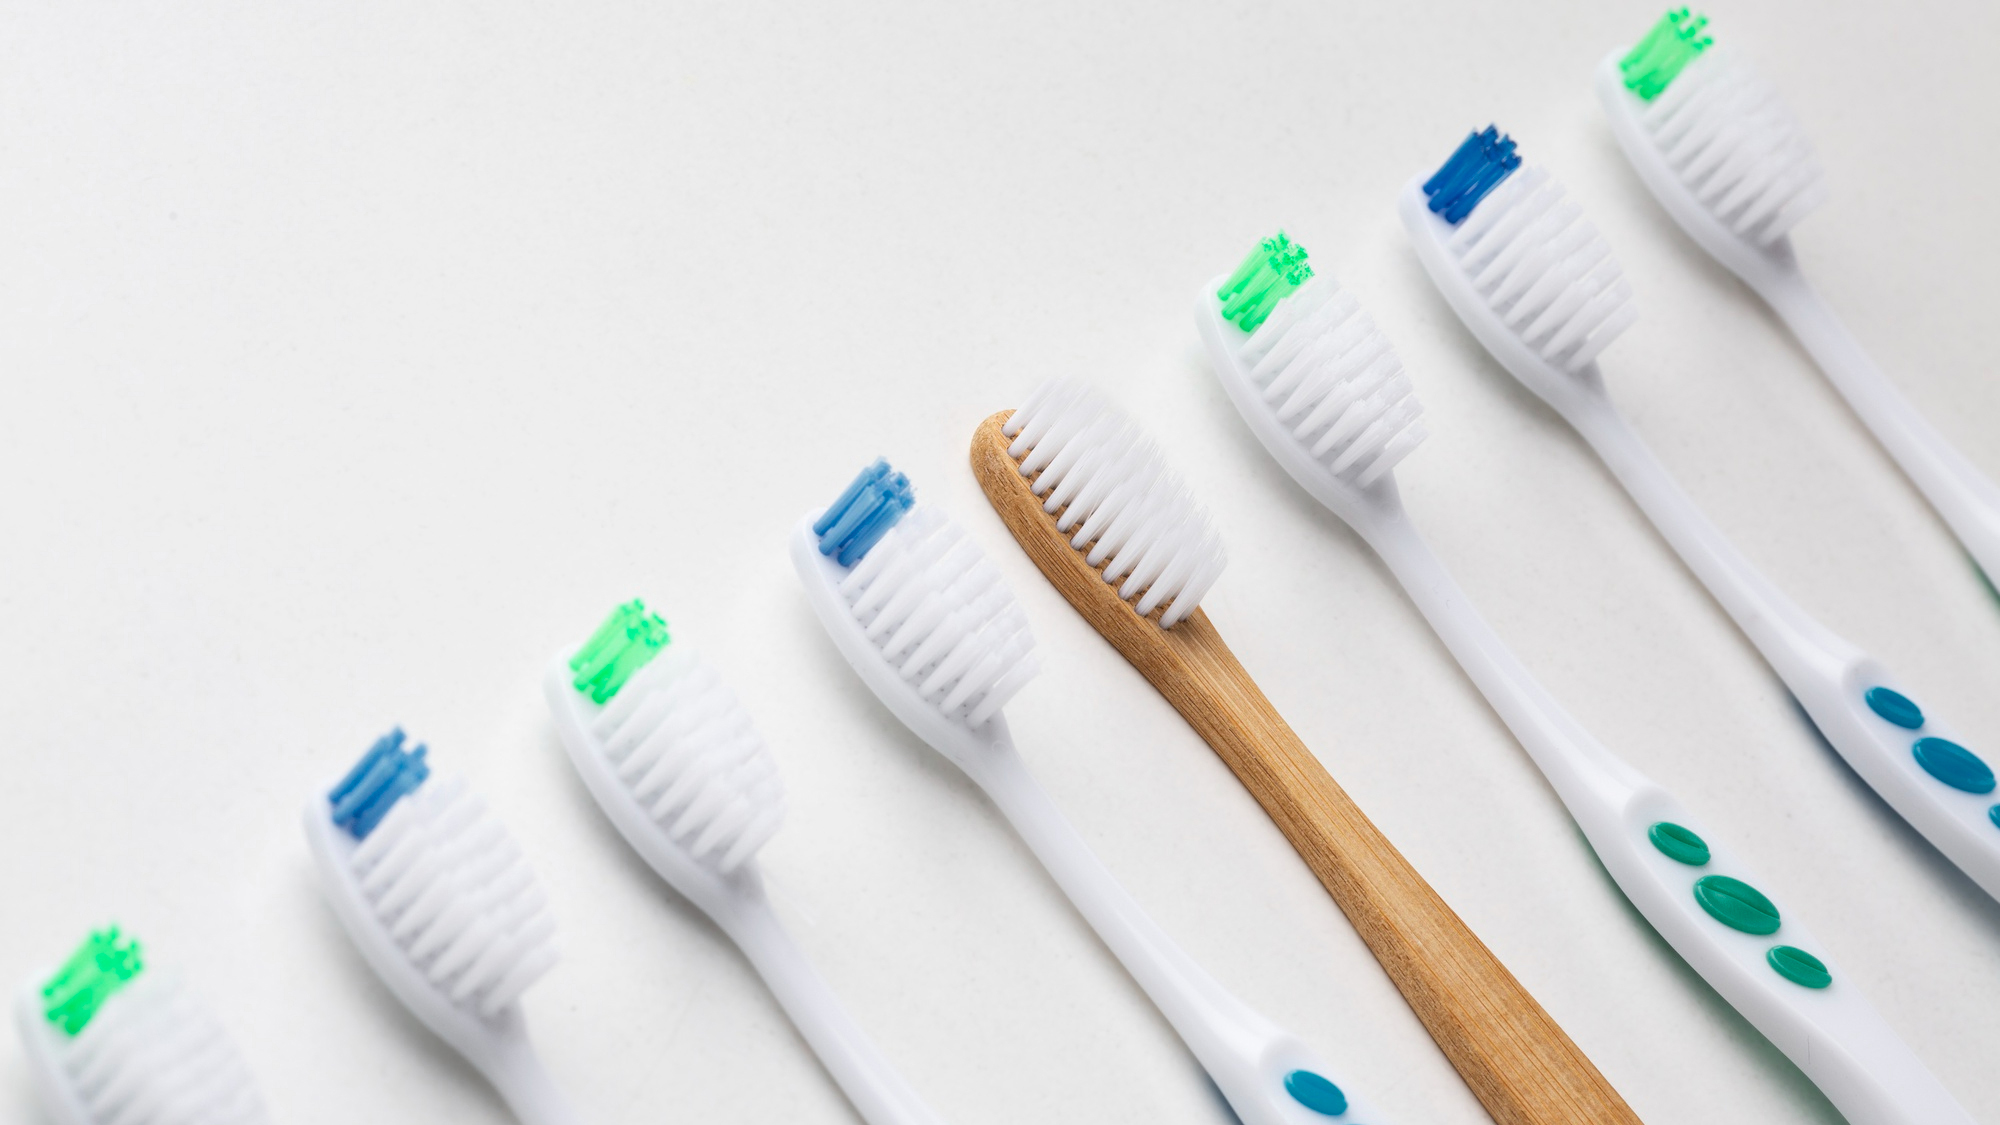 think about lifecycle products in oral care